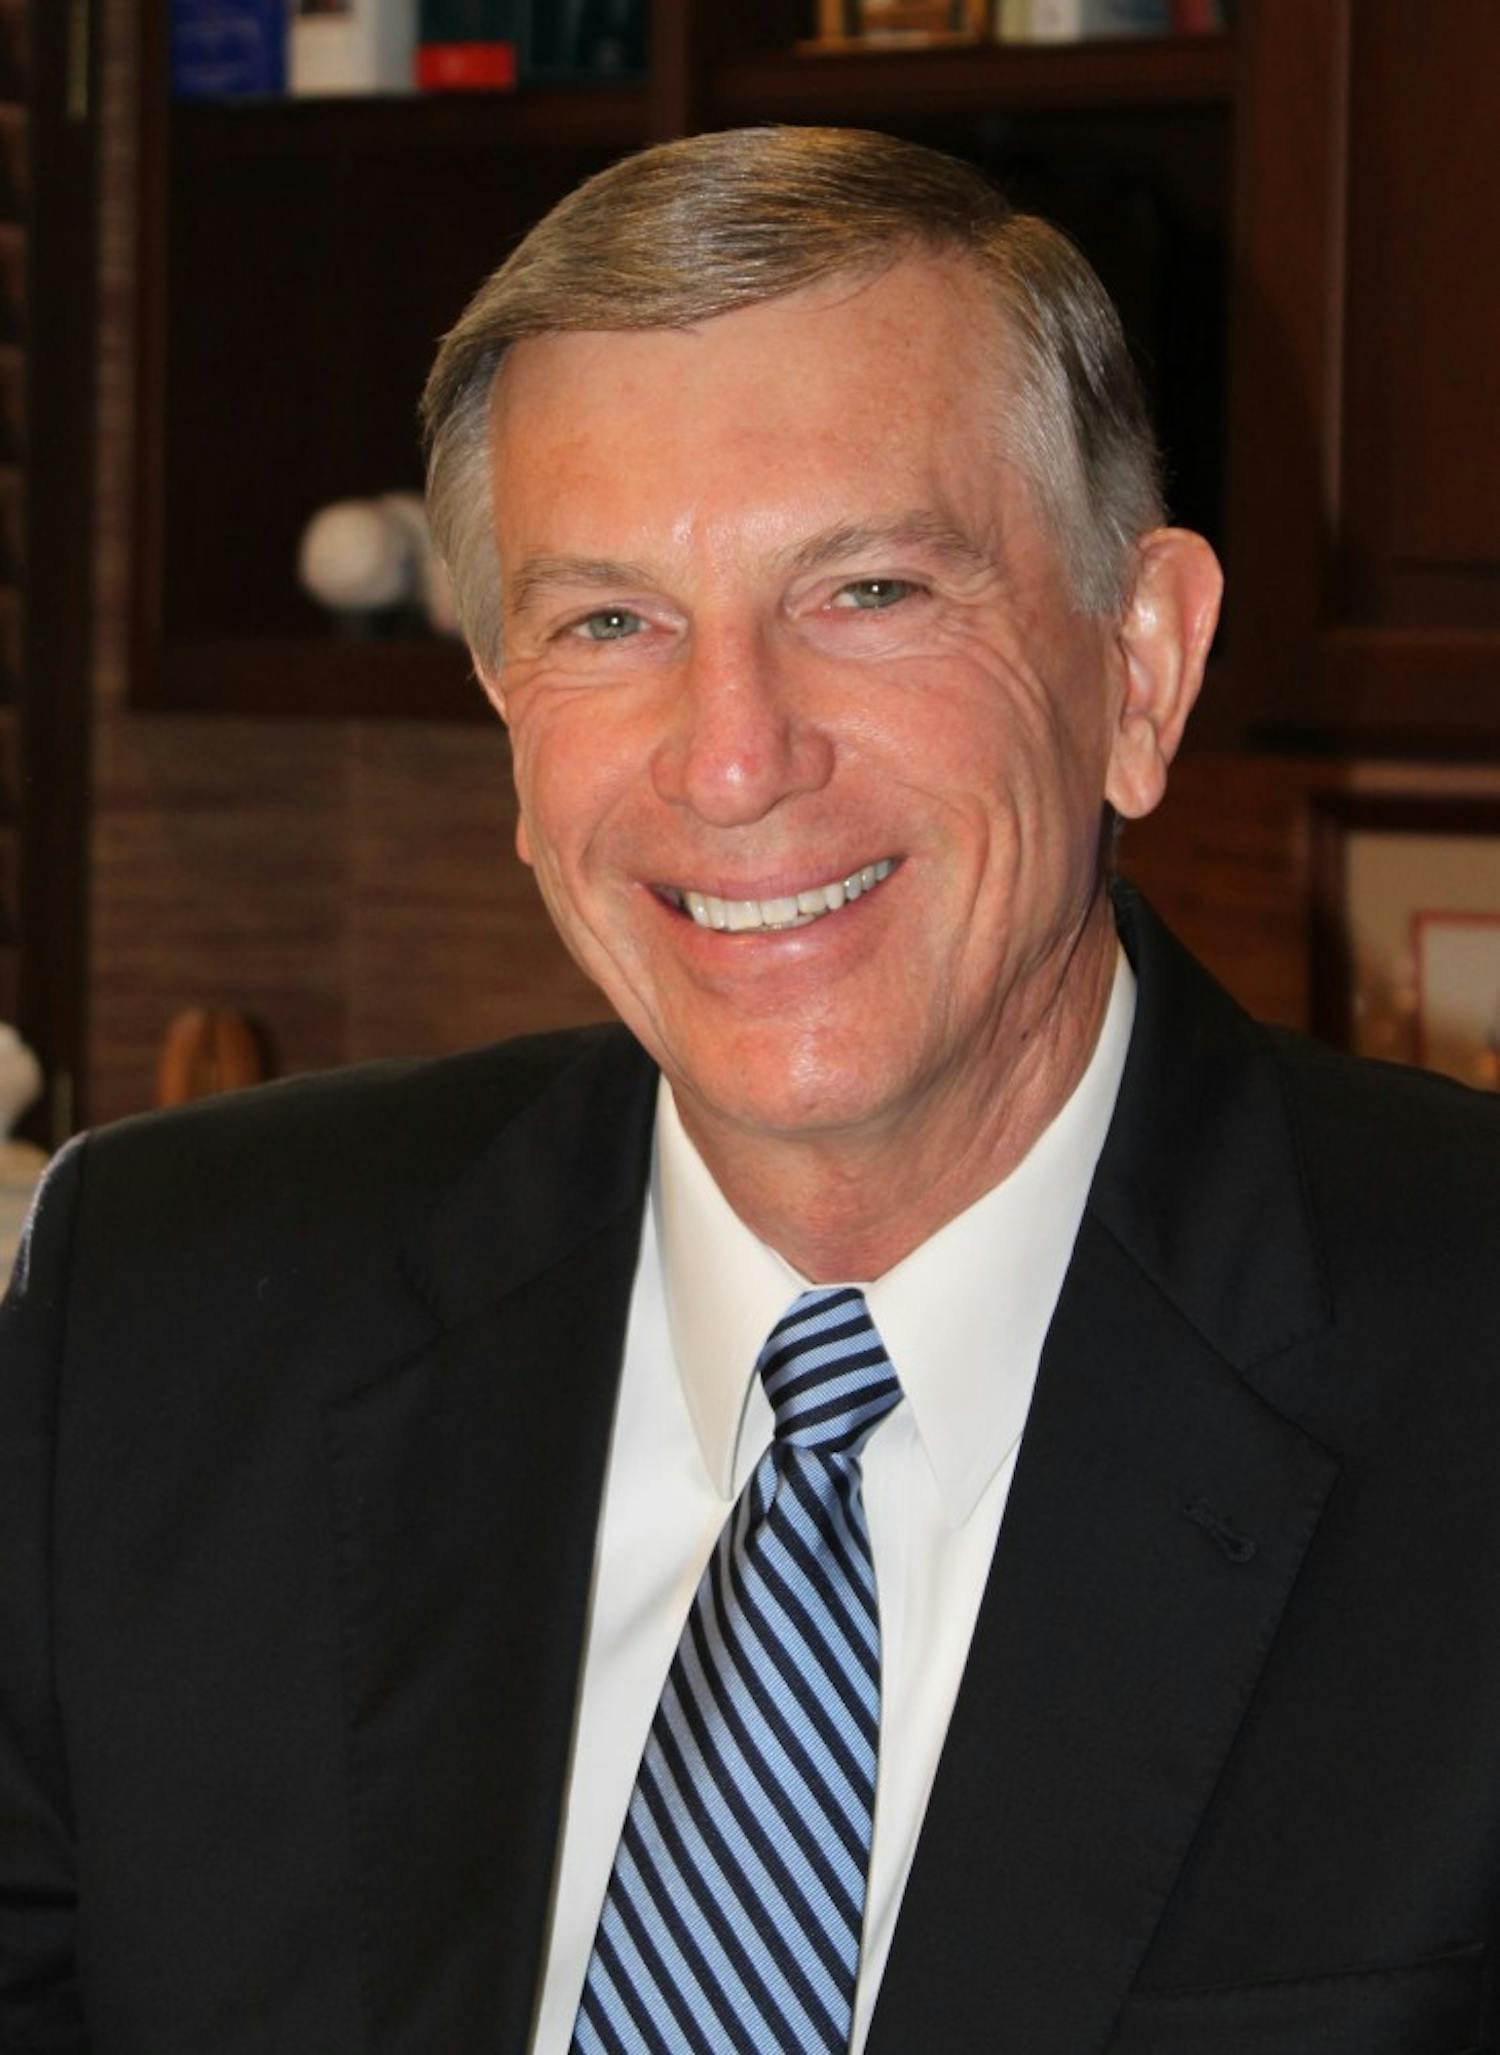 Thomas Ross took over as UNC-System President on January 1, 2011